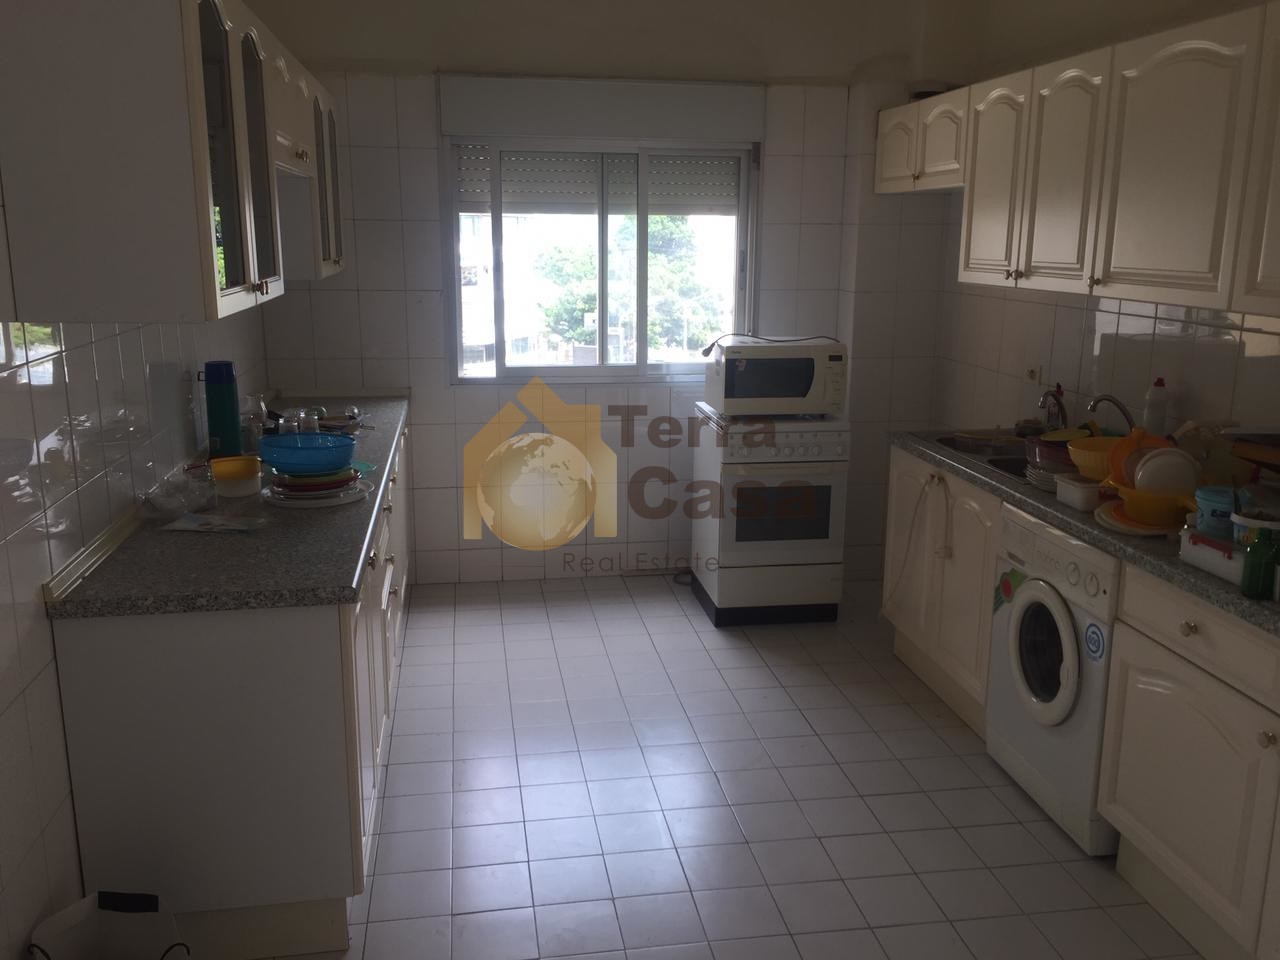 Semi furnished apartment for rent cash payment.Ref#2926